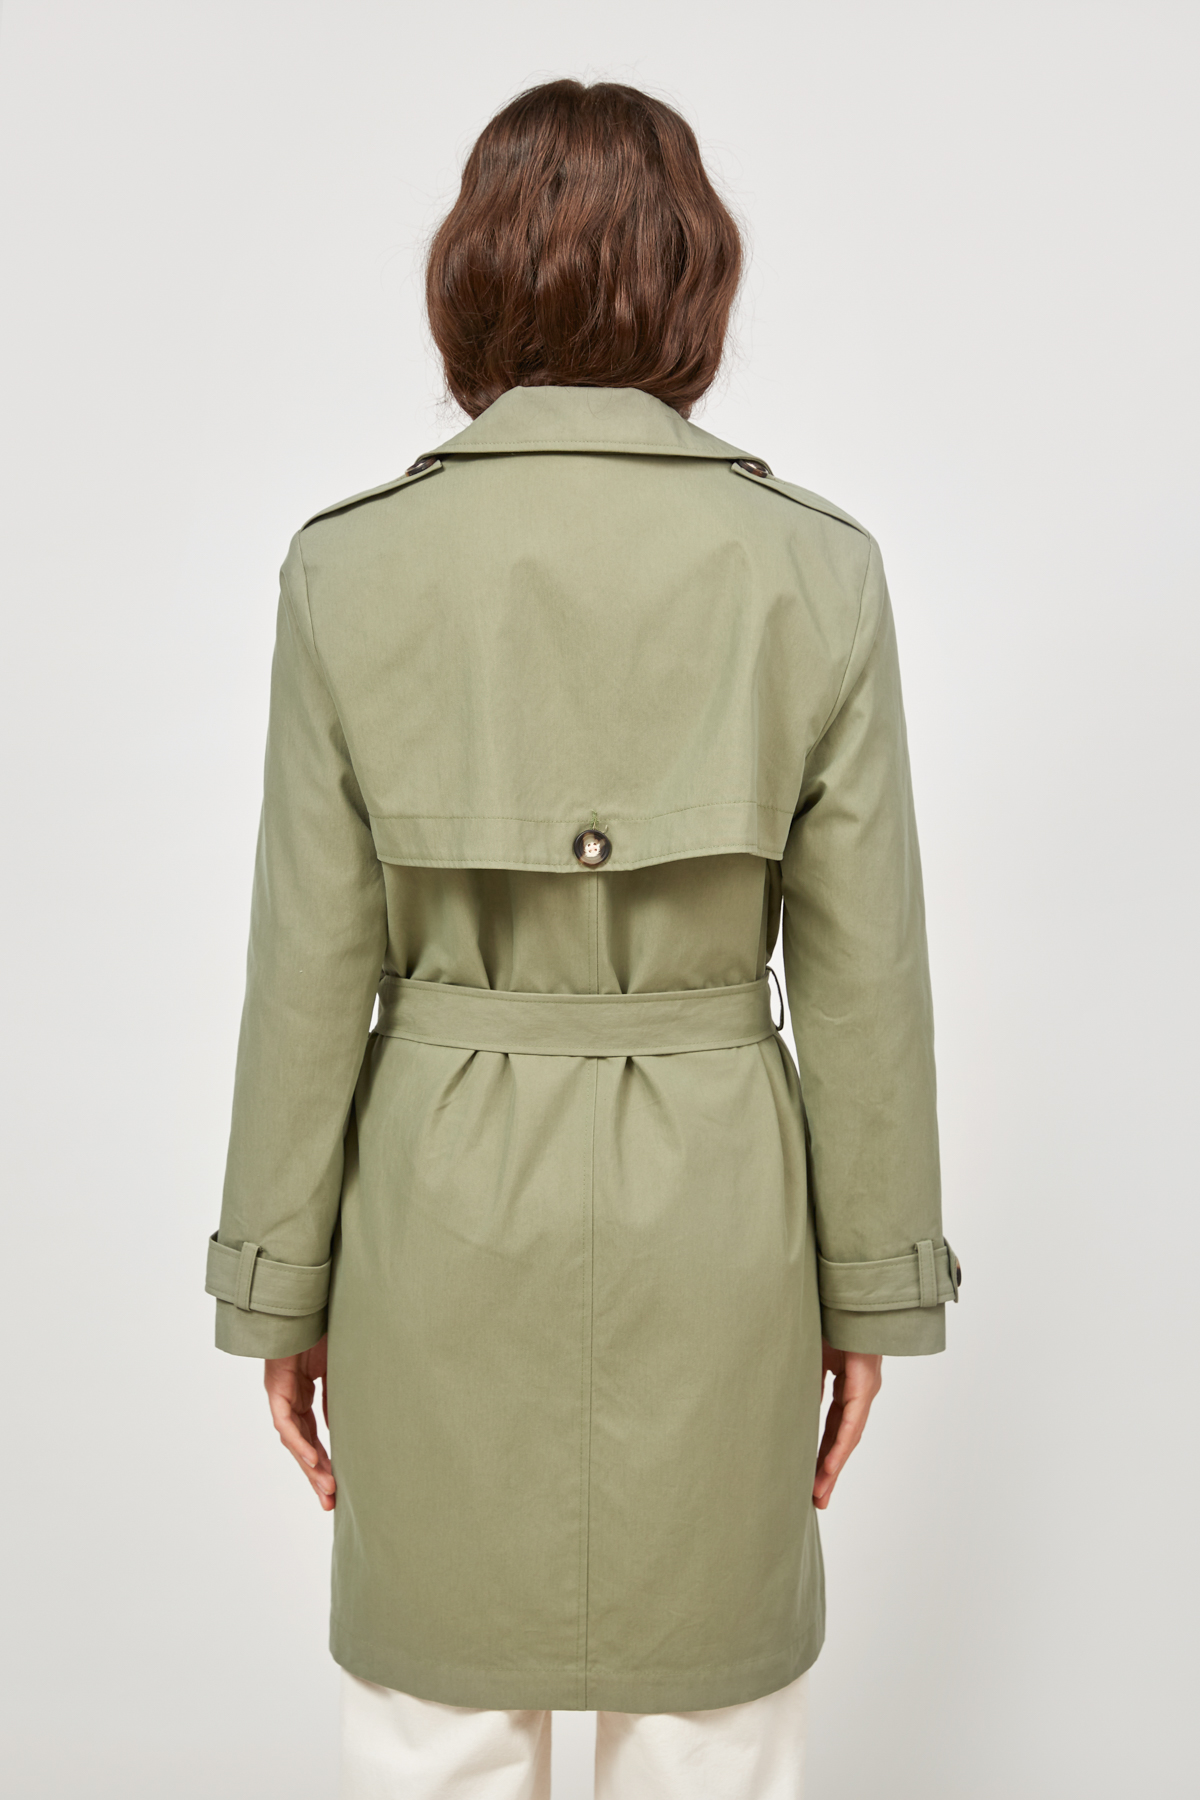 Khaki trench coat above the knee with horn buttons, photo 4